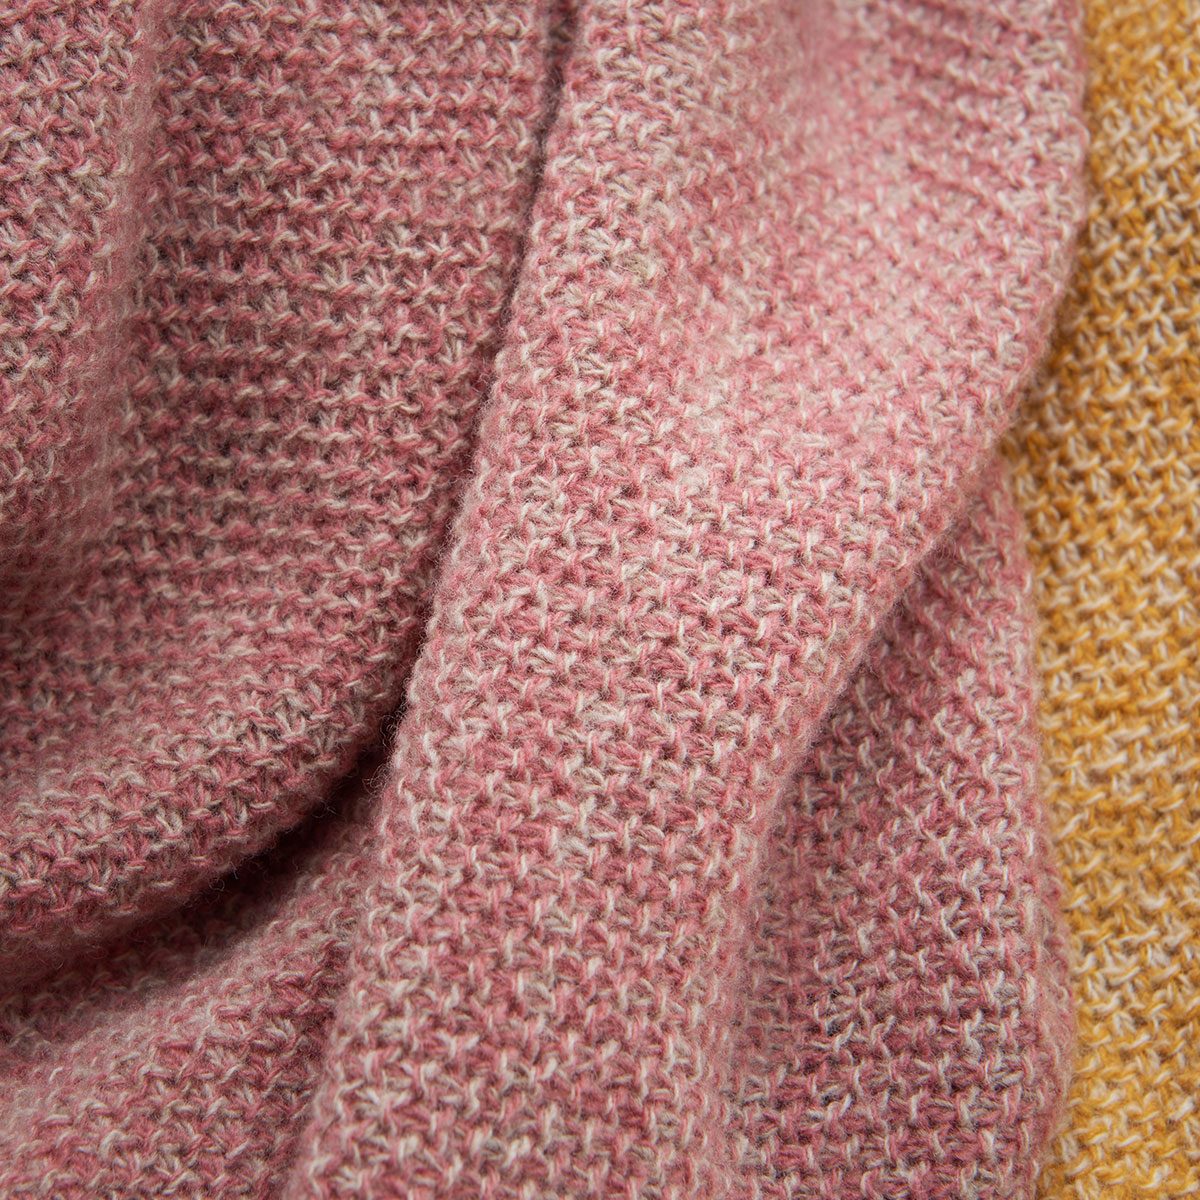 WOL wool blankets in dusty rose and amber